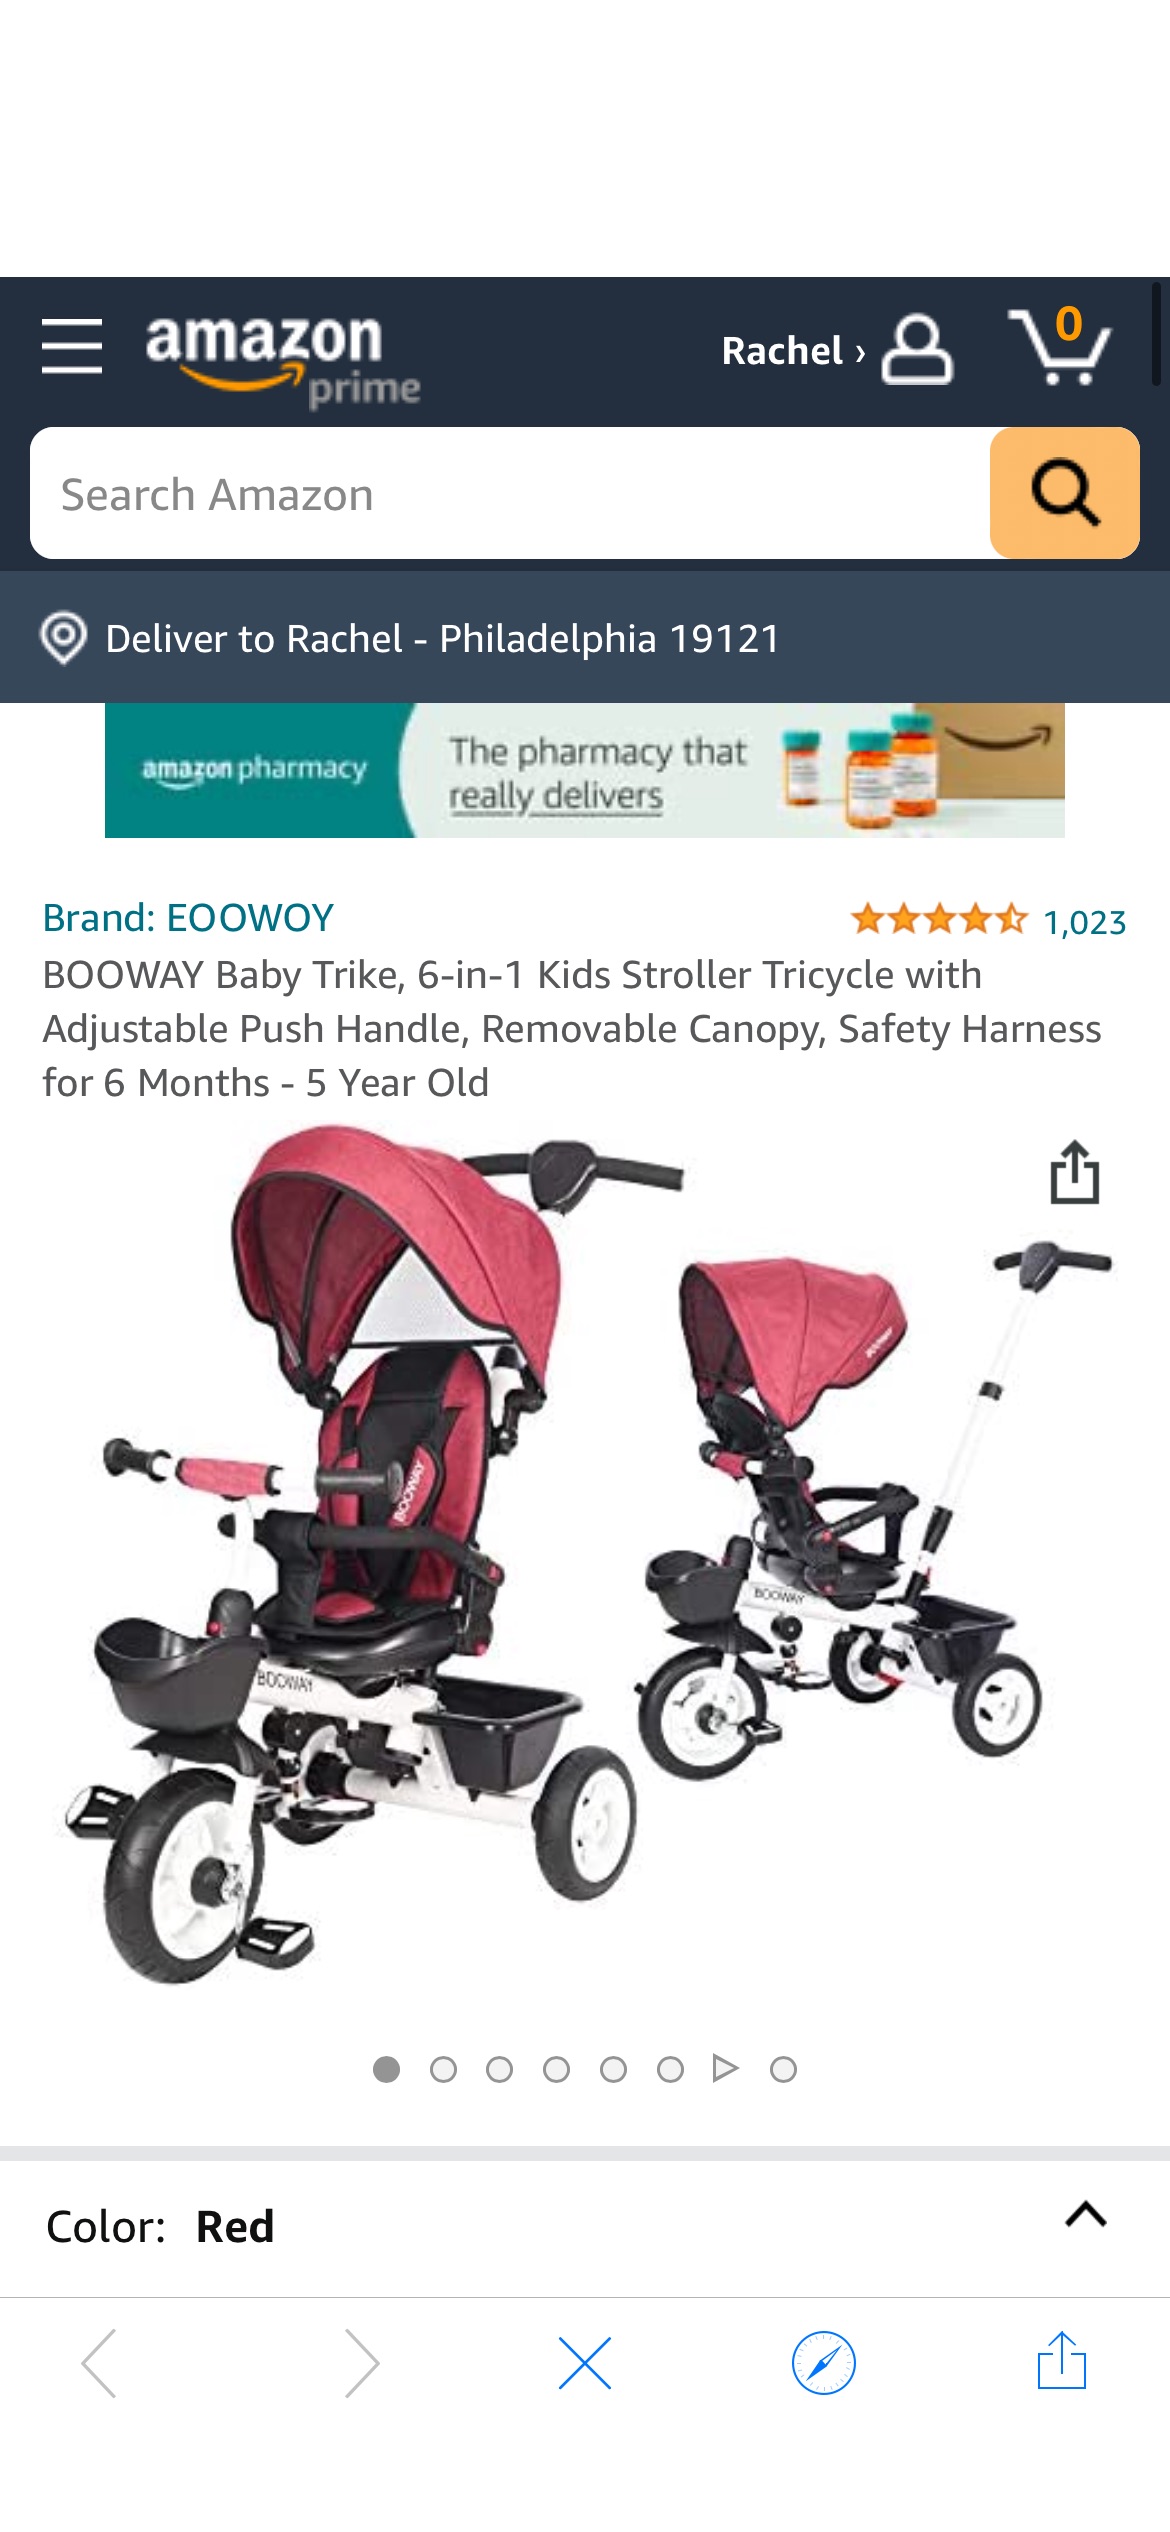 Amazon.com: BOOWAY Baby Trike, 6-in-1 Kids Stroller Tricycle with Adjustable Push Handle, Removable Canopy, Safety Harness for 6 Months - 5 Year Old : Baby